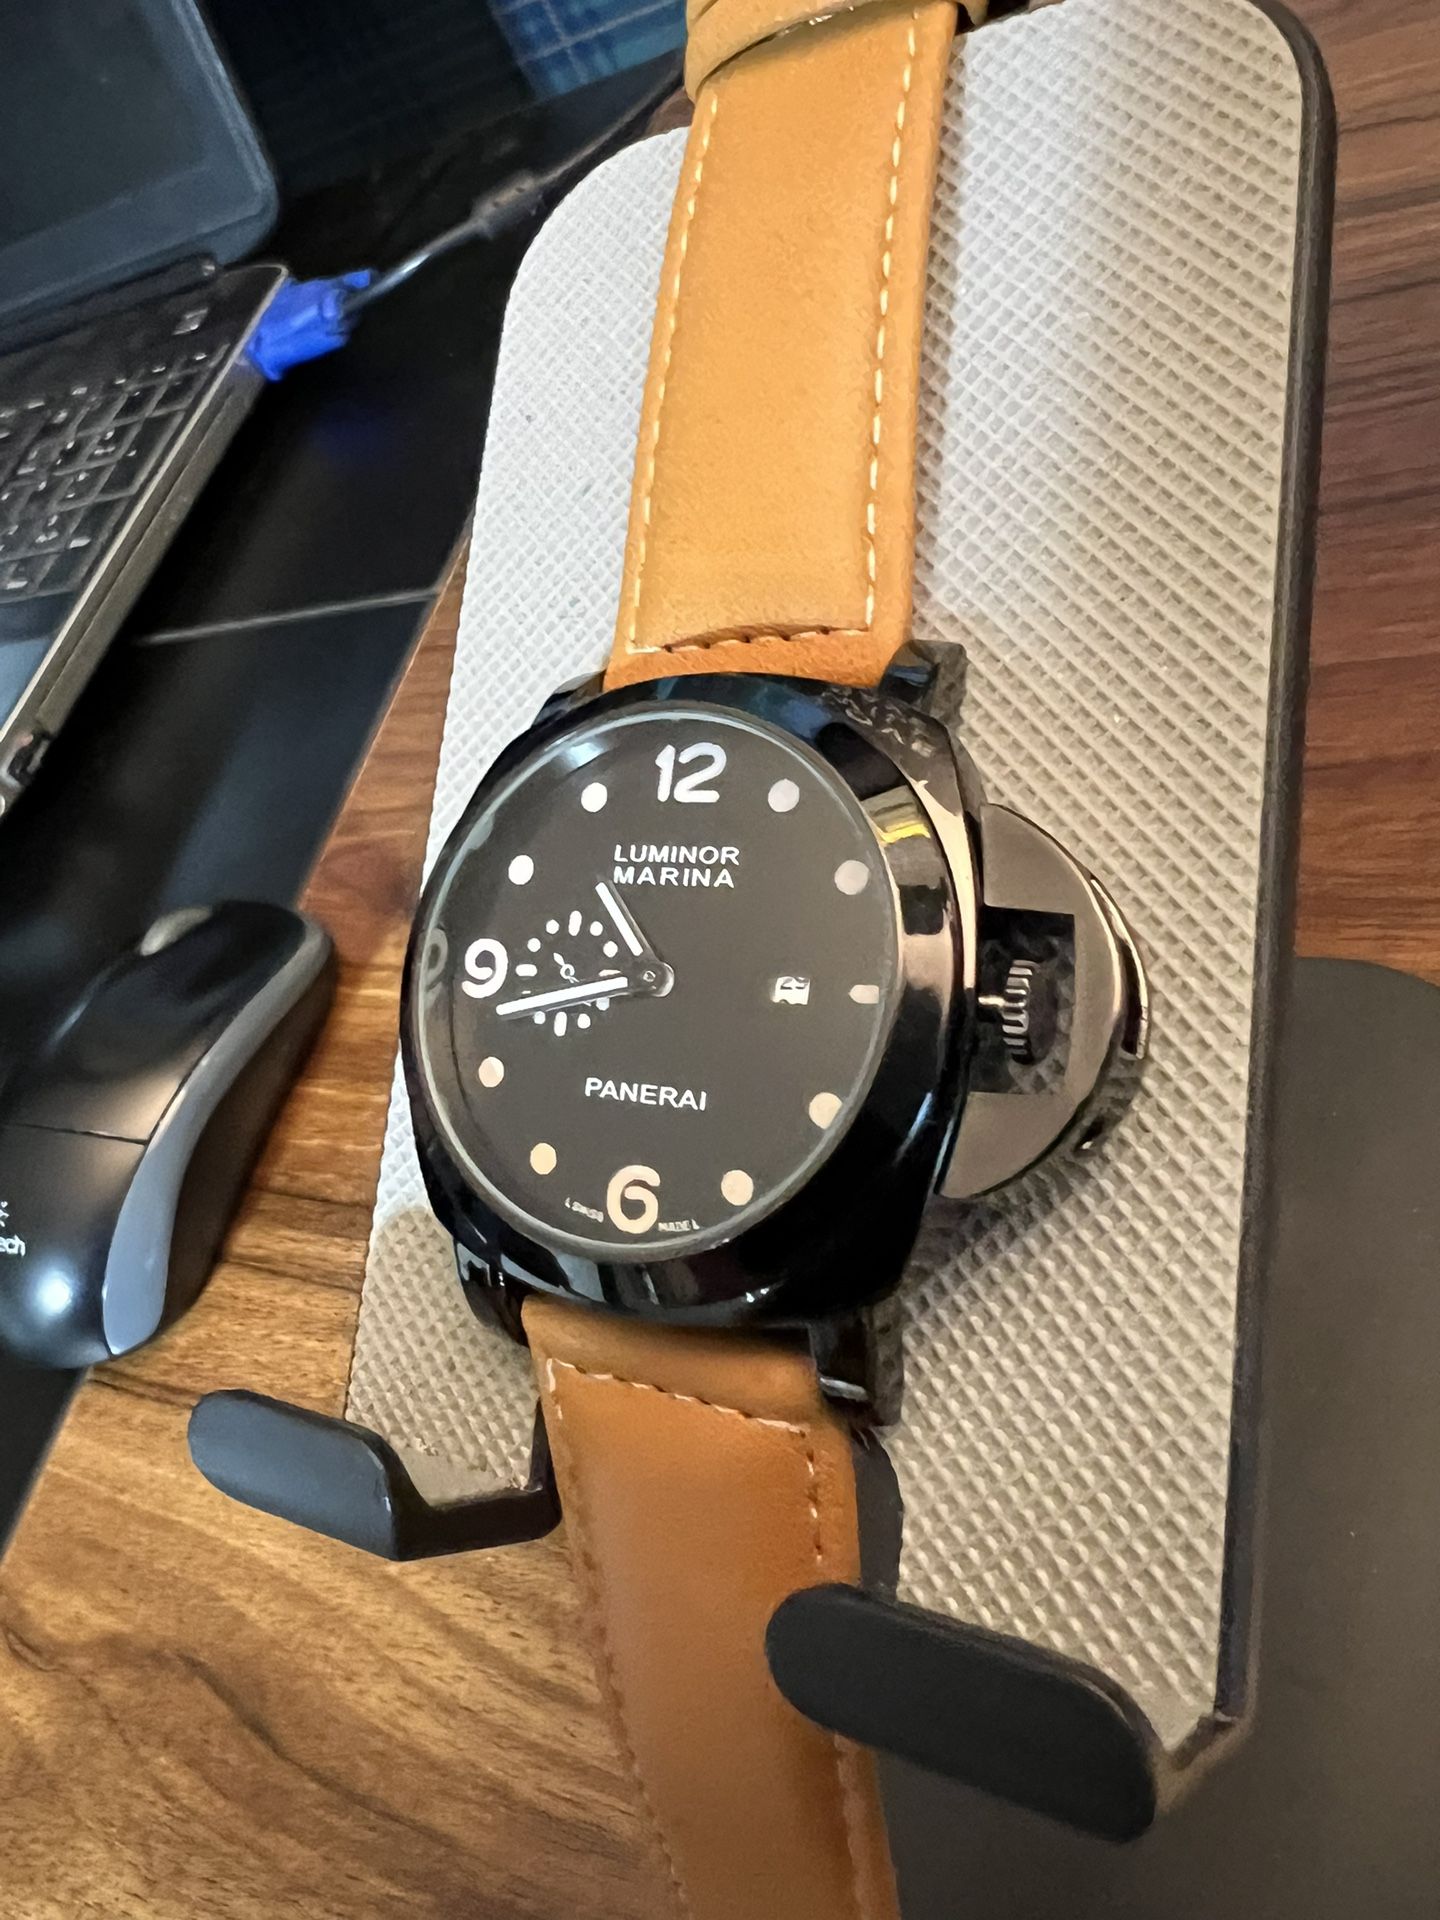 Watch, Panerai, Realistic, fun, secondhand is non-functional, leather band nice timepiece, $129